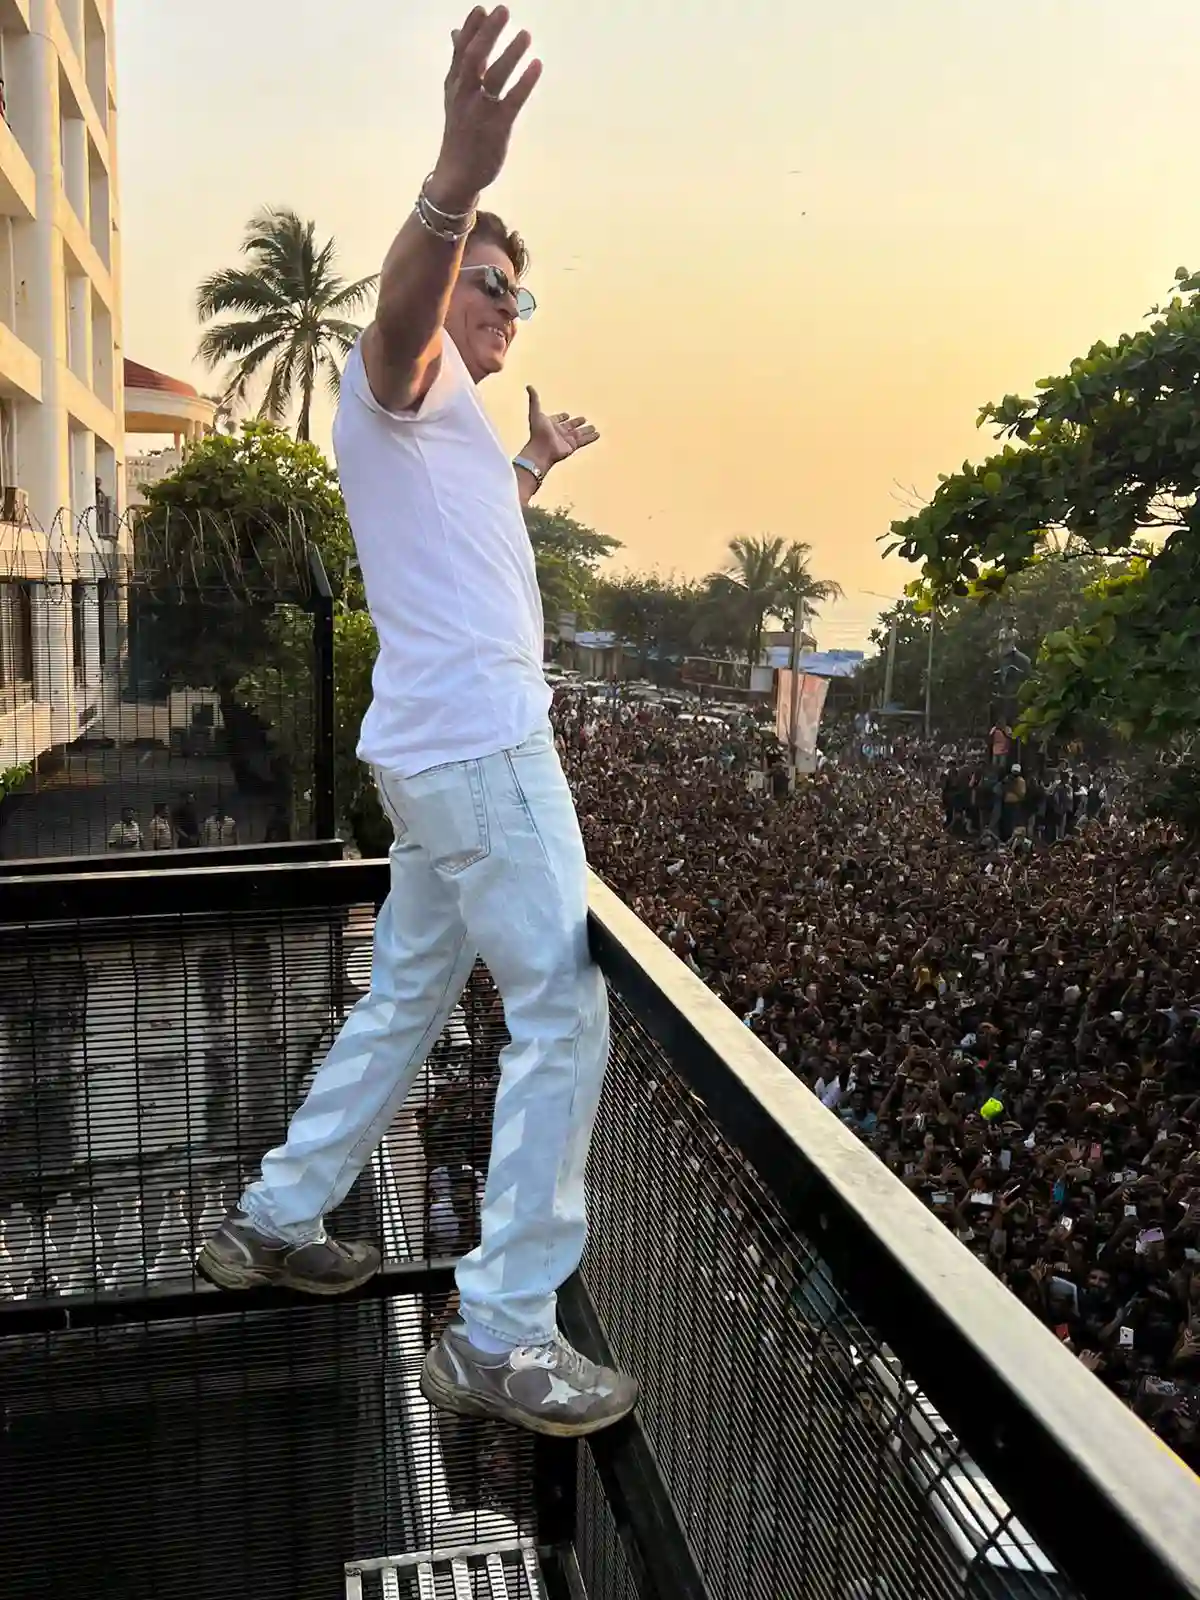 Millions of fans flock to Shahrukh's home on his birthday